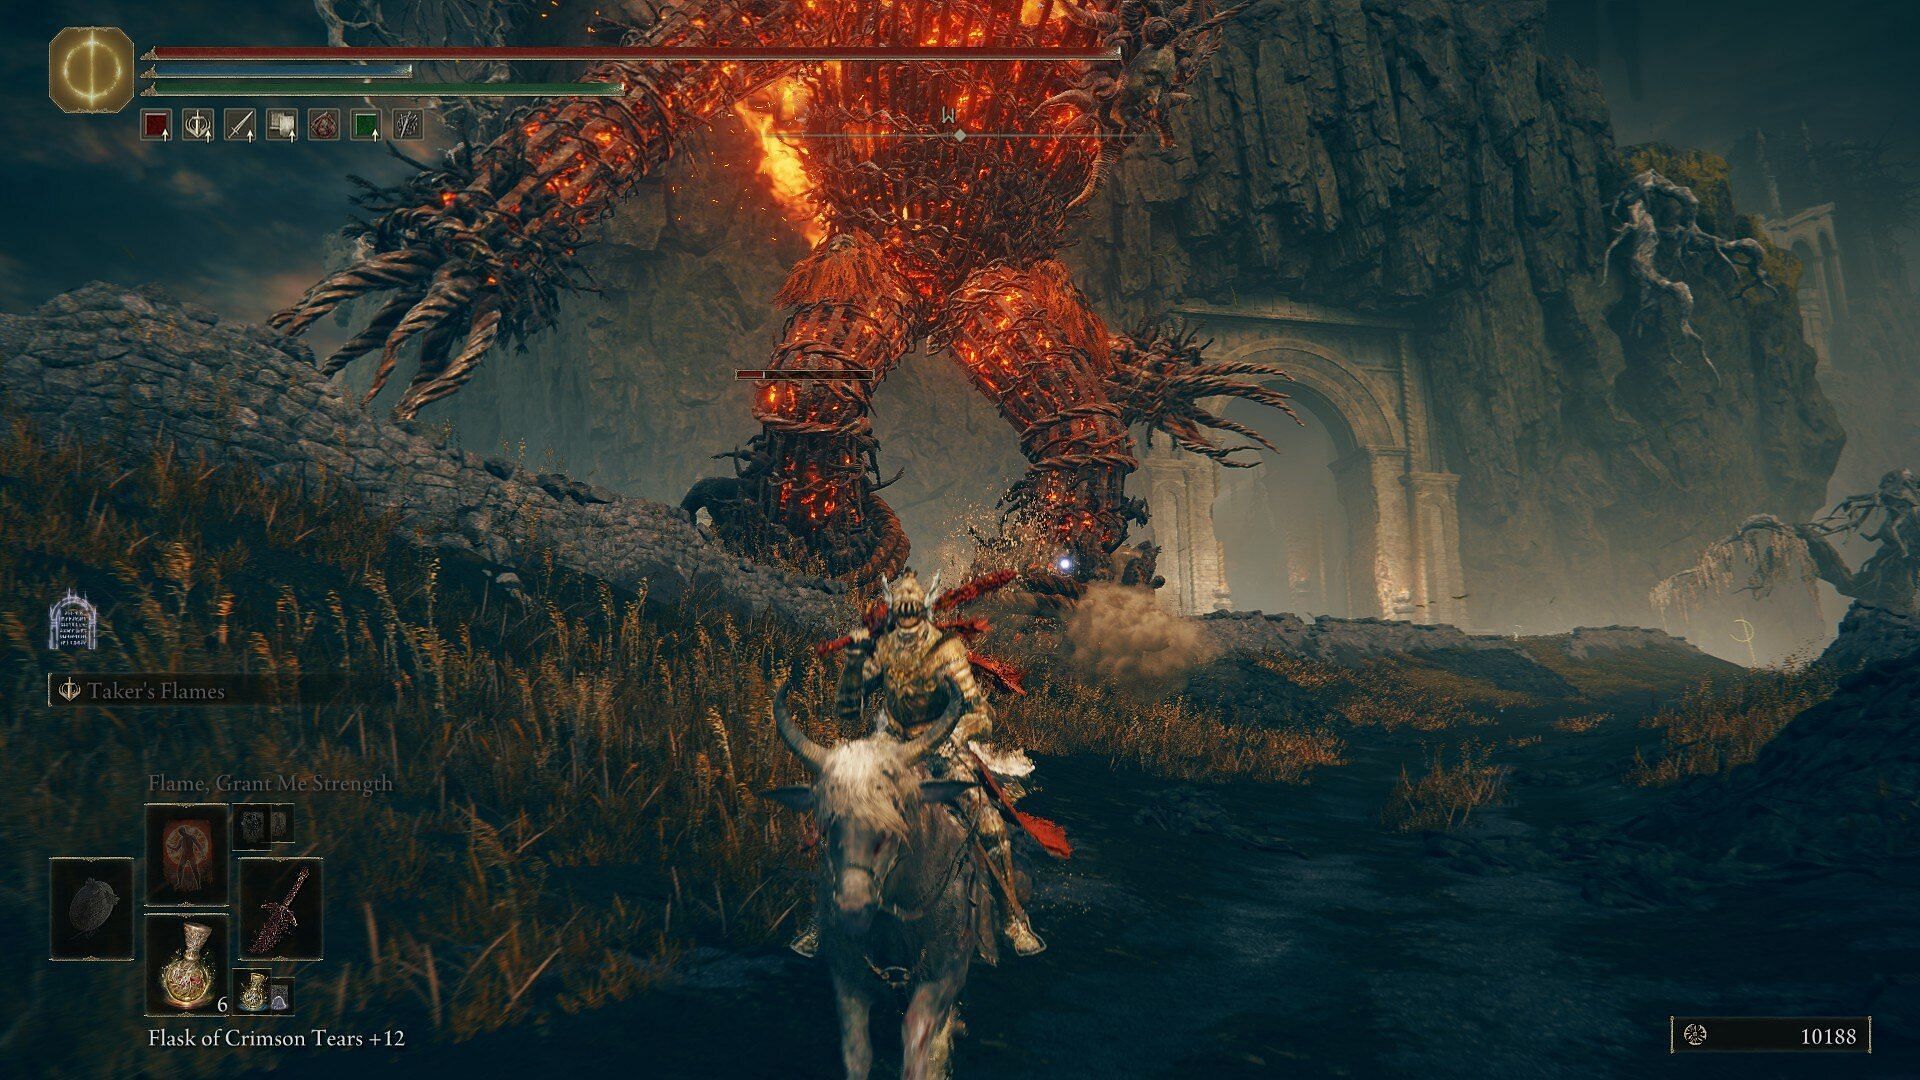 The Furnace Golems are one of the toughest new overworld enemies in Elden Ring Shadow of the Erdtree (Image via FromSoftware)